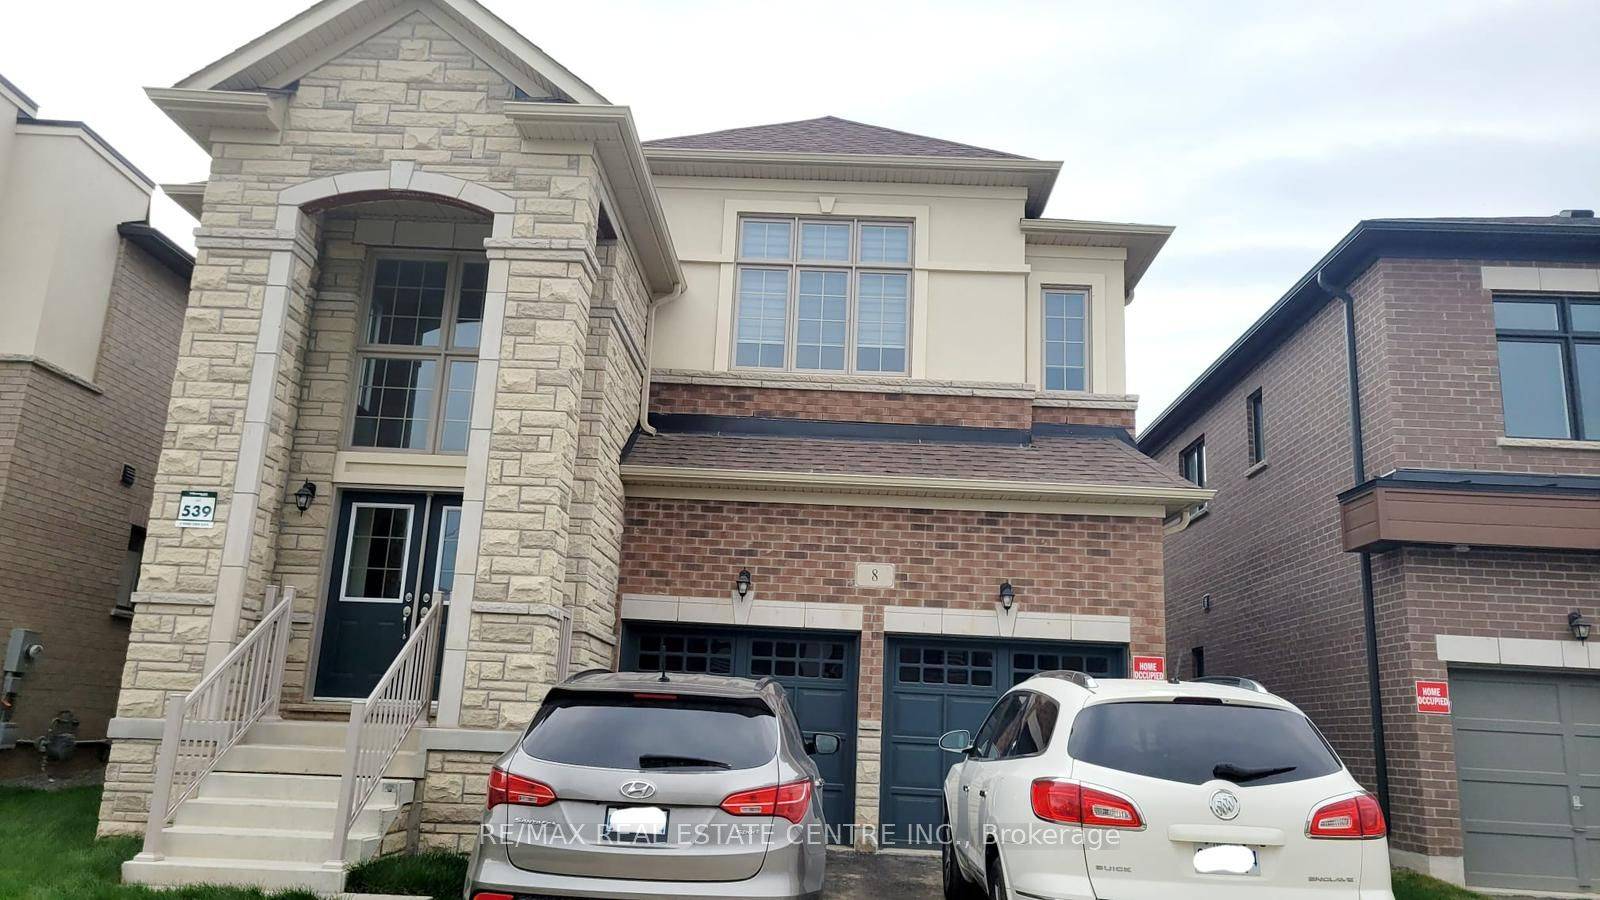 Ideal Location. 5 Months old Green Park Built Home In Prime Waterdown Location, Great Open Concept Floor Plan 5 bedroom, 4 bathroom detached home.